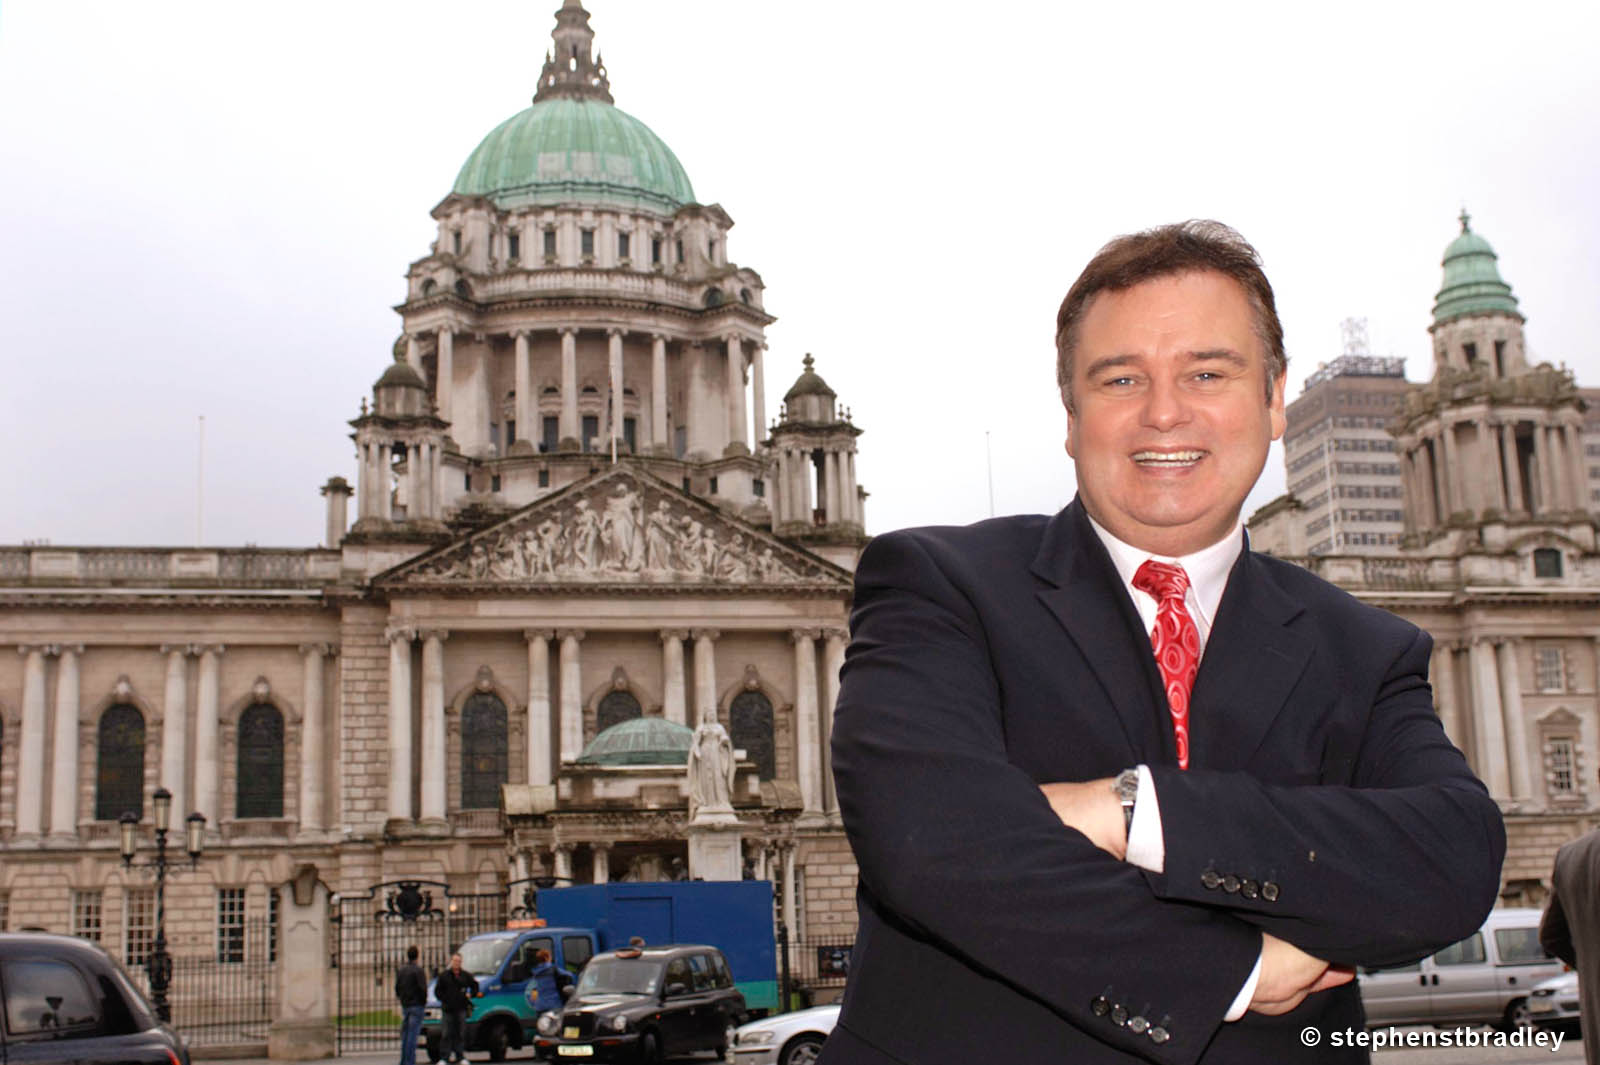 PR Photographer Dublin Ireland portfolio photo of celebrity Eamonn Holmes pictured in front of Belfast City Hall, Northern Ireland - photo 6115 by Stephen S T Bradley PR photography and video production services Dublin, Ireland